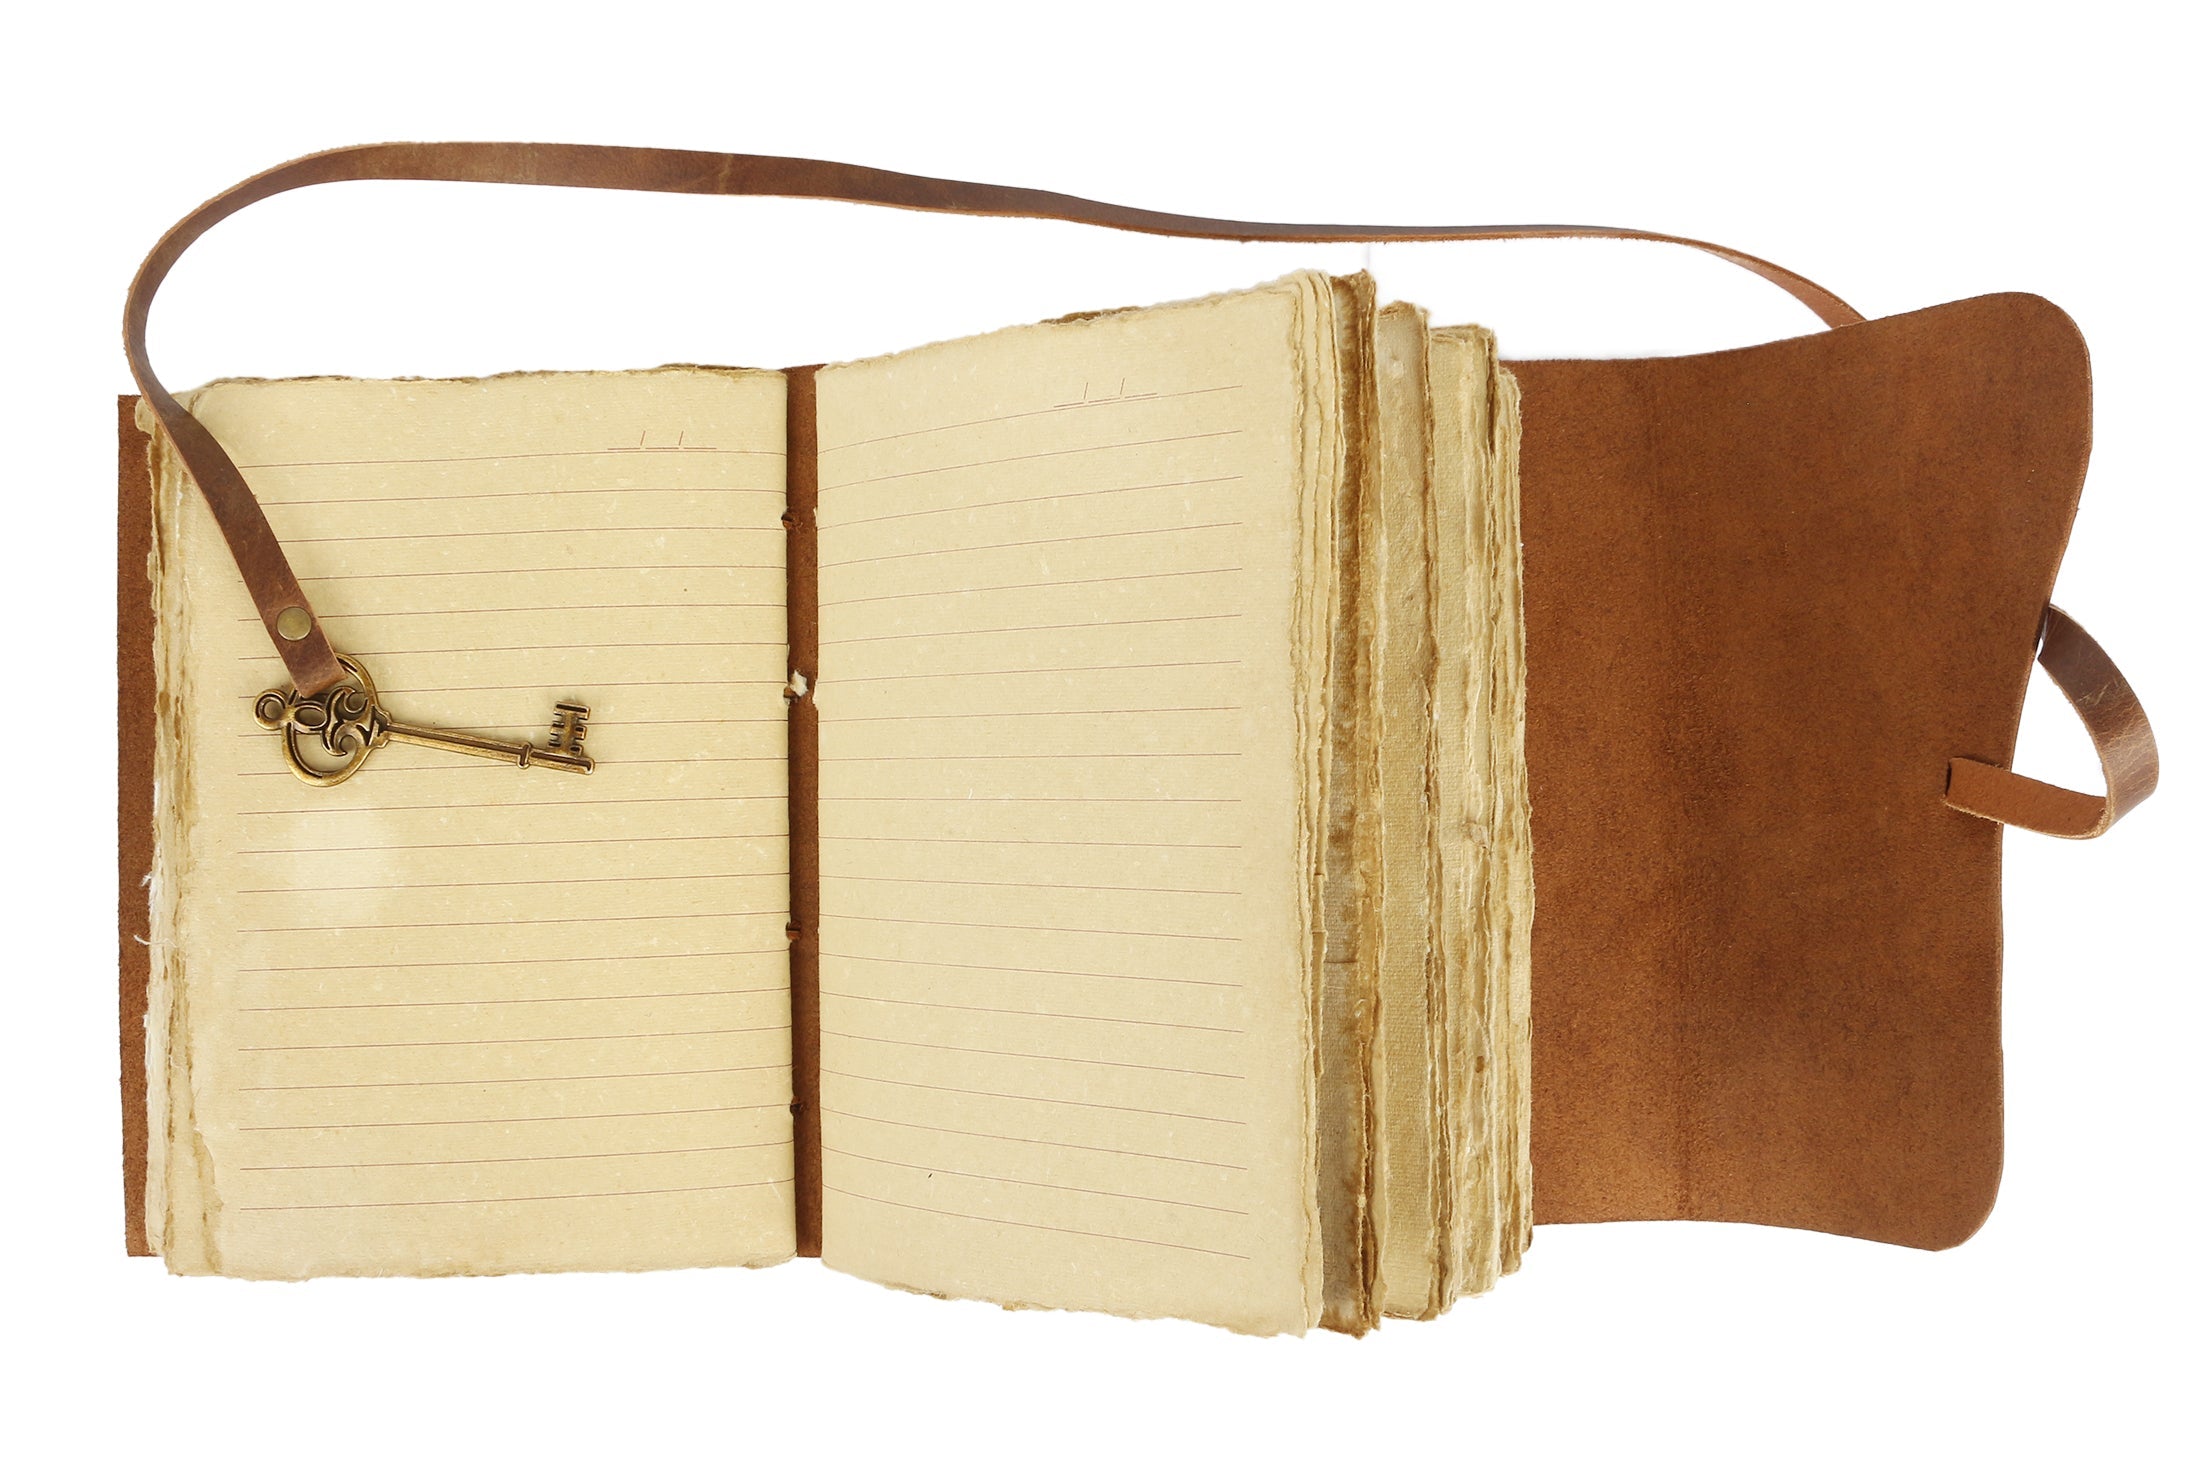 Leather Village Vintage Journal - Handmade Leather Bound with Deckle Edge Paper - Drawing Sketchbook (umber Brown, 6 Inches x 4 Inches)